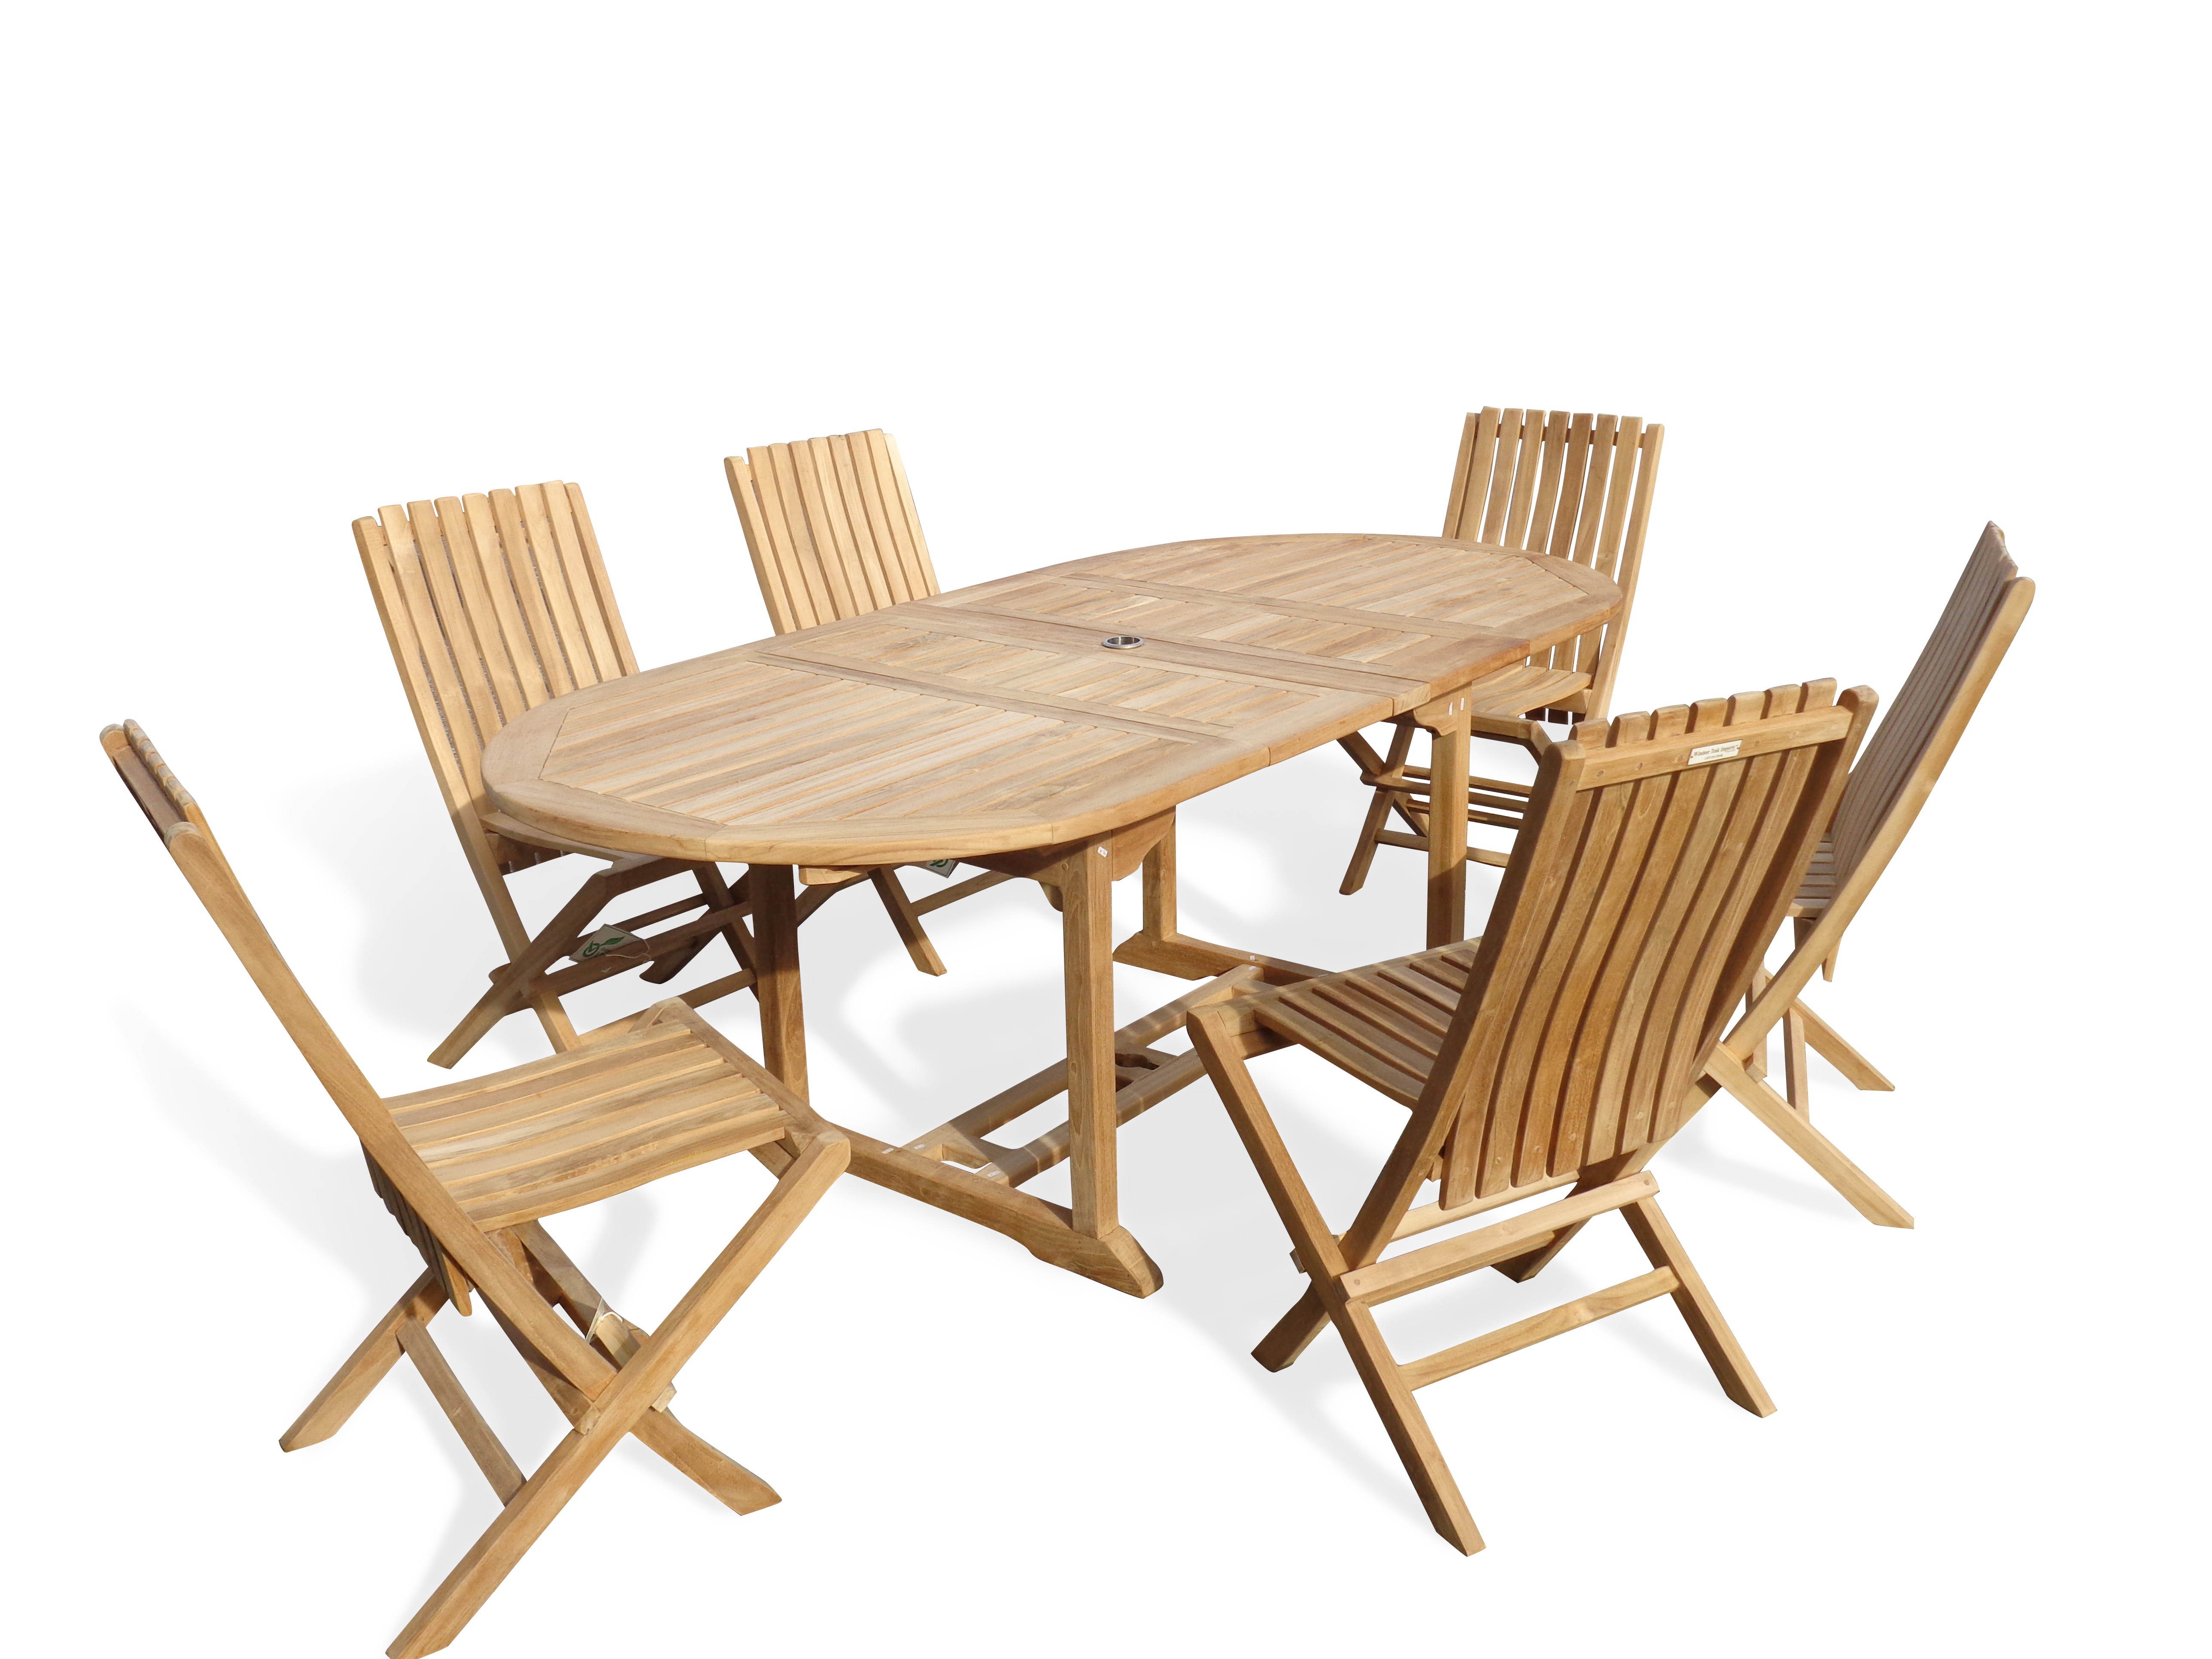 Buckingham 82" x 39" Double Leaf Oval Extension Teak Table W/6 Java Folding Chairs w/ Lumbar Support .